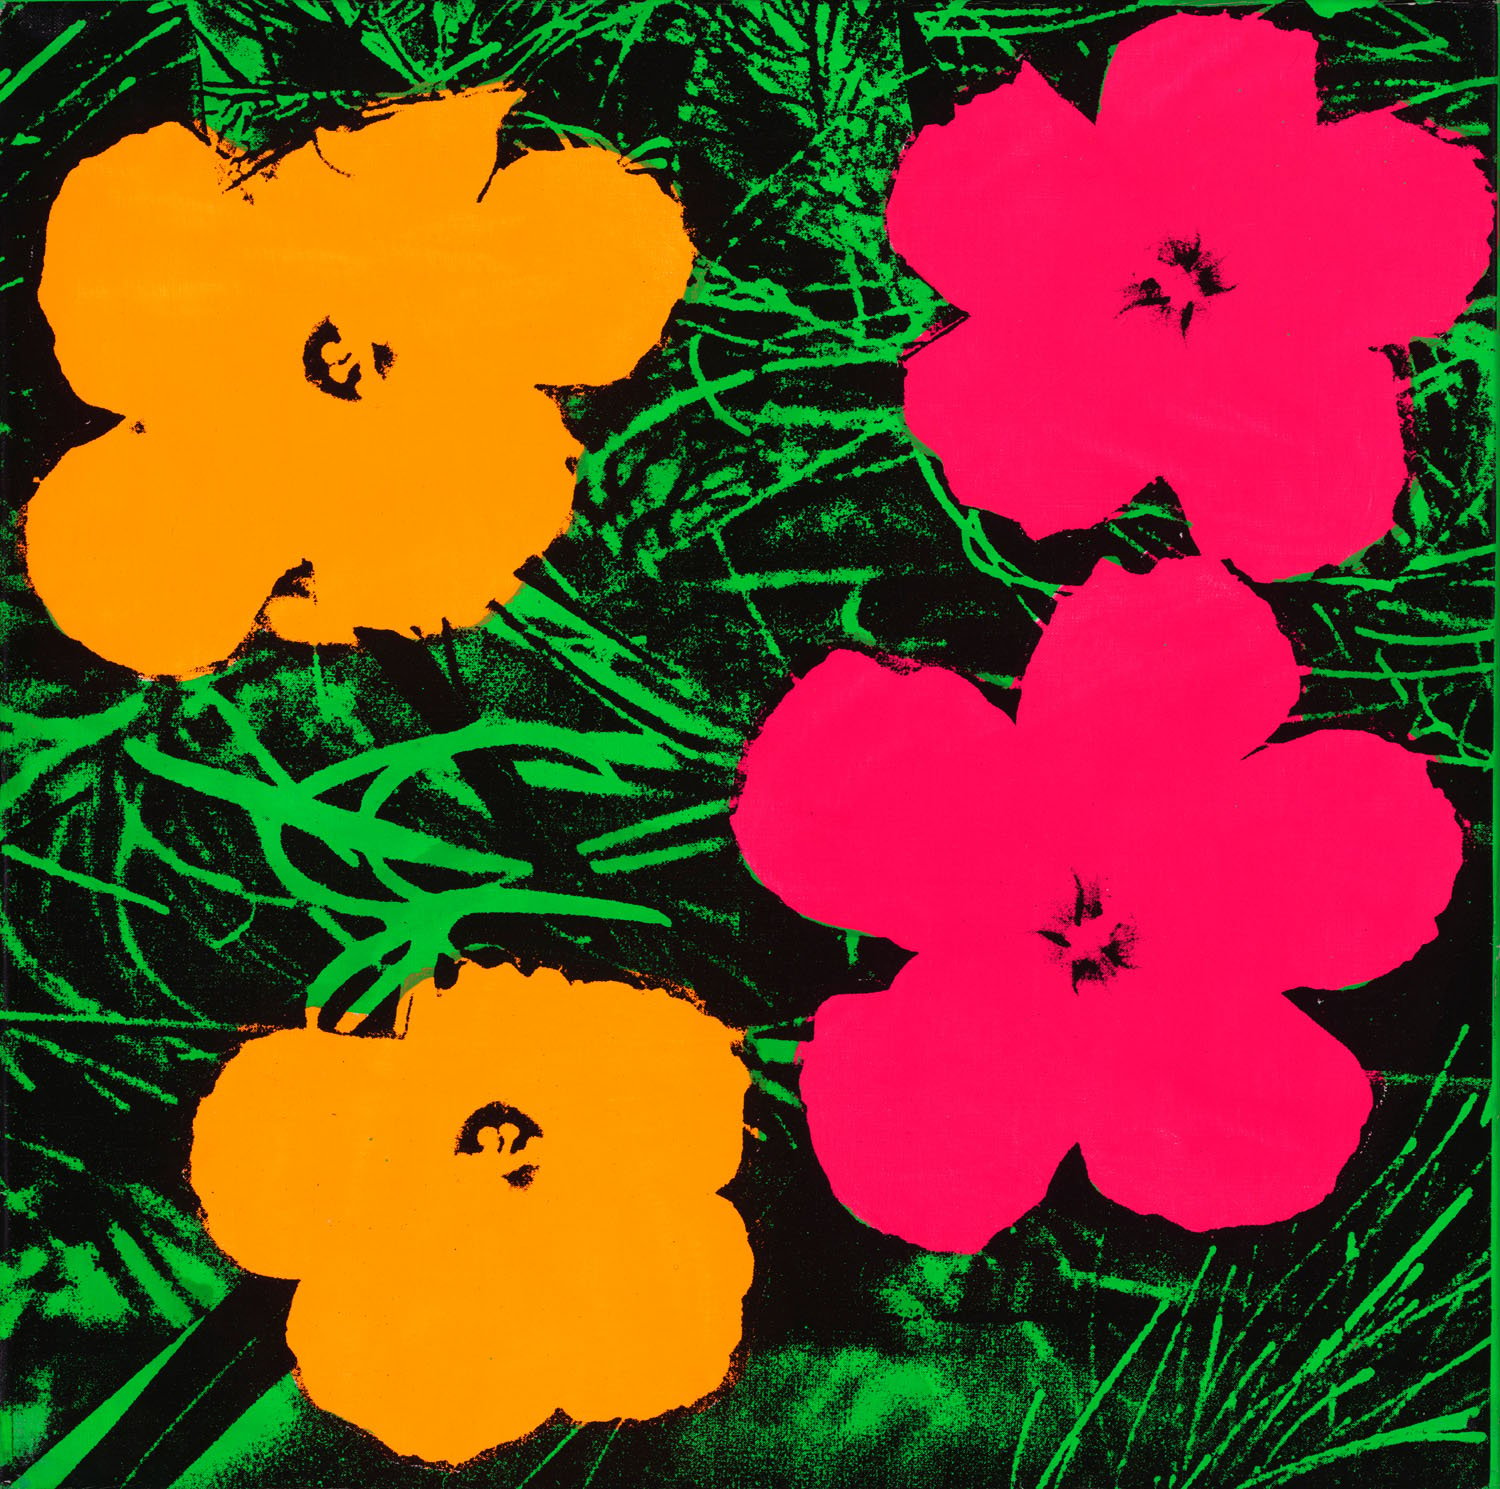 Andy Warhol (1928–1987), Flowers, 1964. Fluorescent paint and silkscreen ink on linen, 61 x 61 cm. The Art Institute of Chicago; gift of Edlis/Neeson Collection, 2015.123 © The Andy Warhol Foundation for the Visual Arts, Inc. / Artists Rights Society (ARS), New York